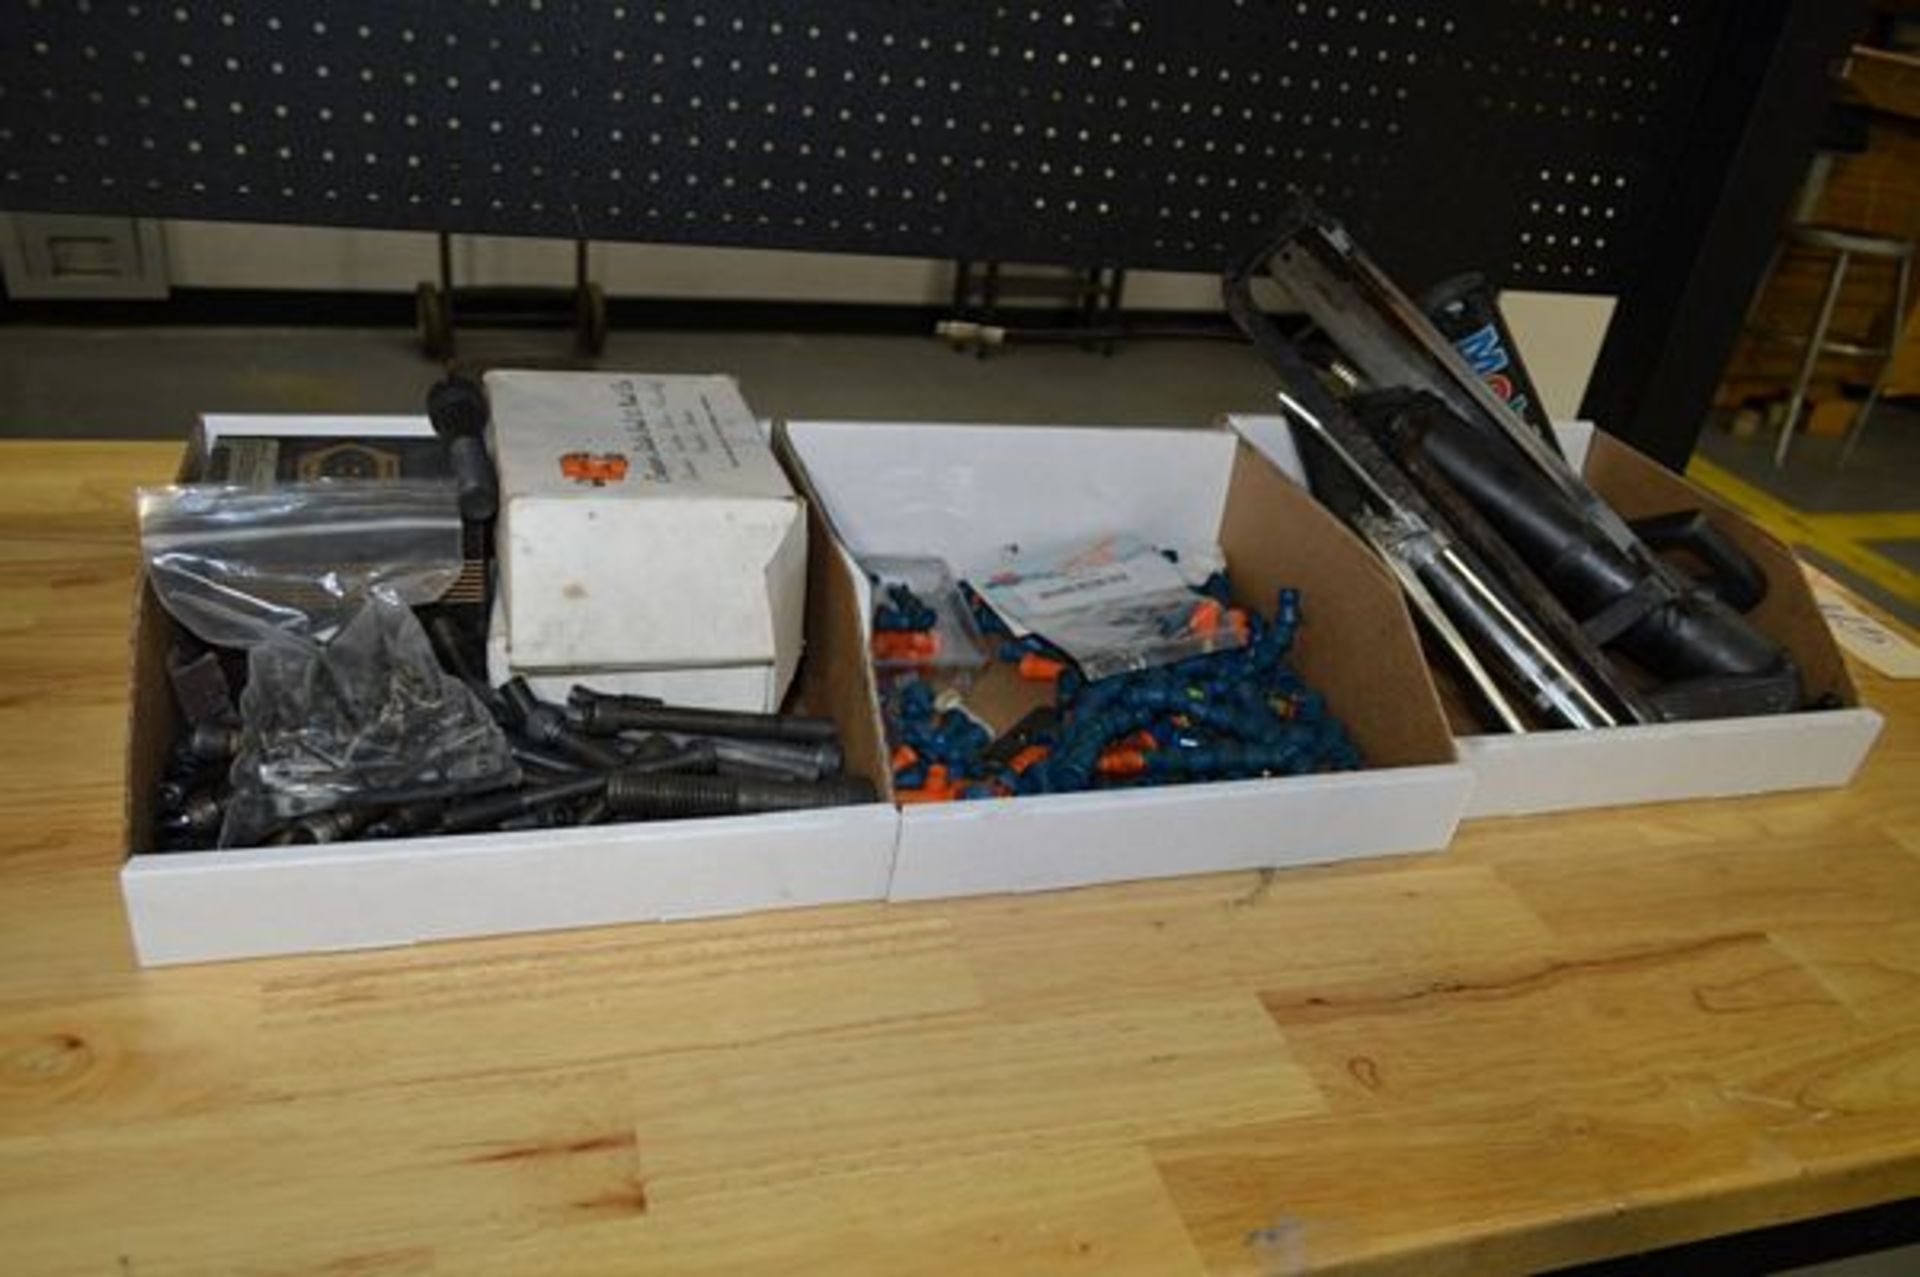 Box of Various Hex Bolts, Coolant Nozzle Attachments, Hand Saws, Grease Guns